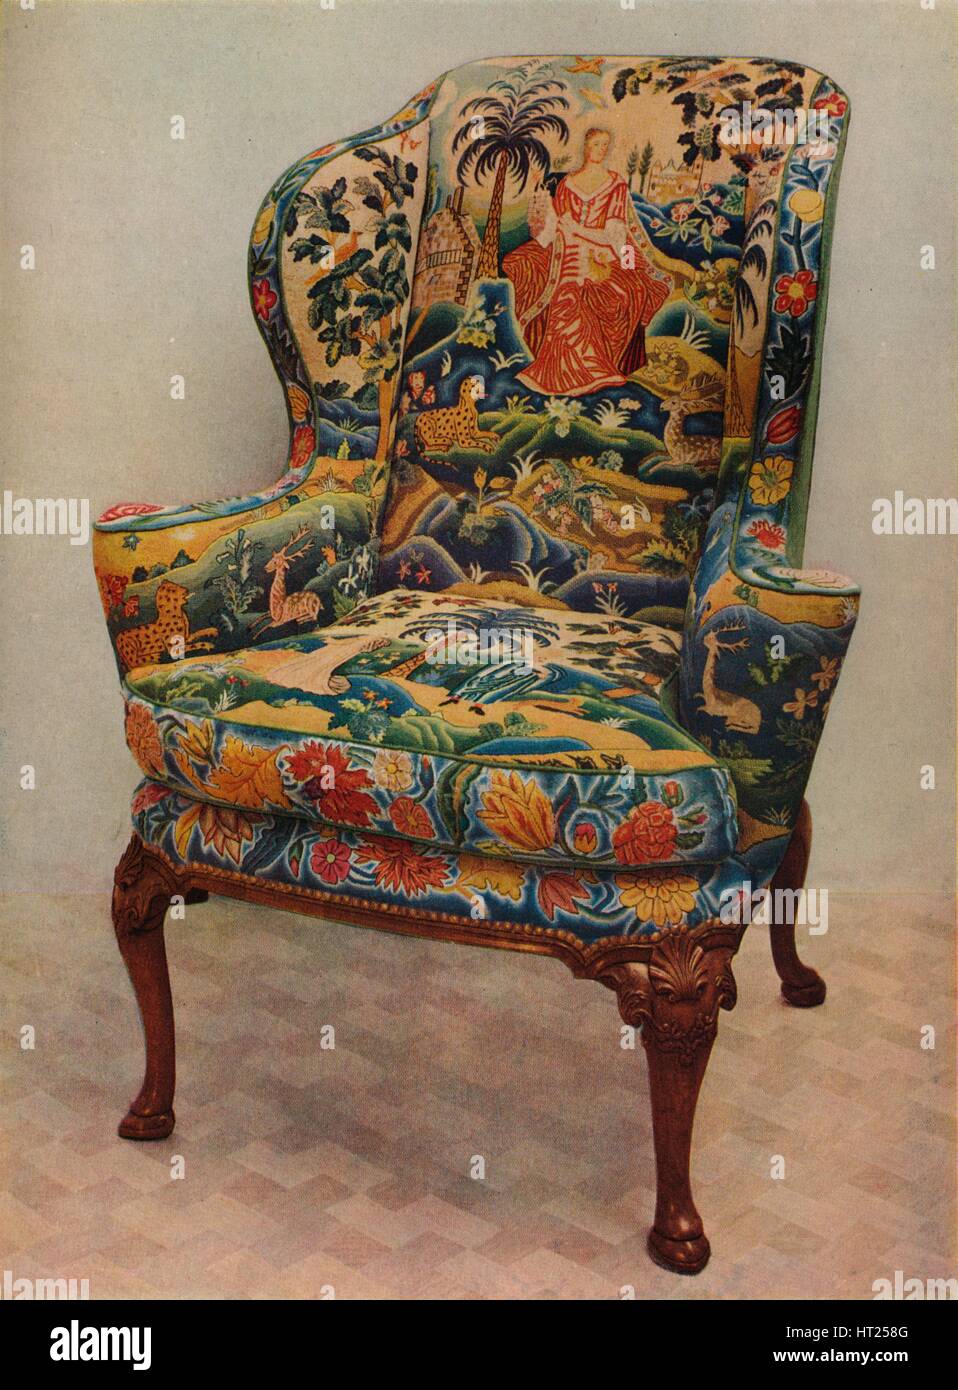 'An upholstered armchair with wings, carved walnut frame and original silk needlework covering', c17 Artist: Unknown. Stock Photo